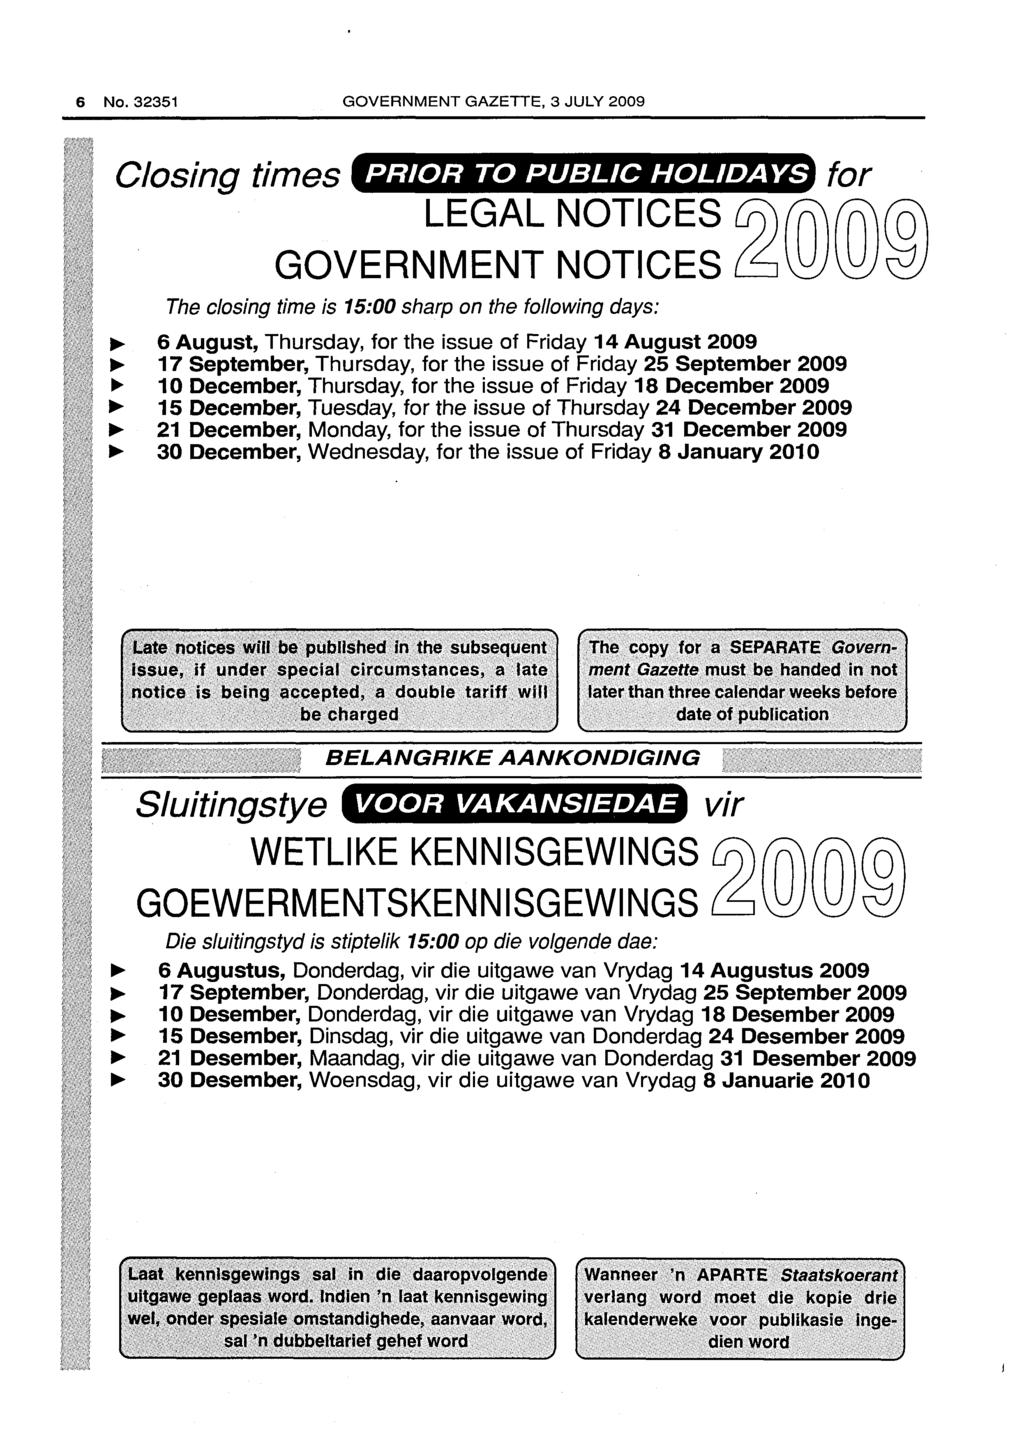 6 No. 32351 GOVERNMENT GAZETTE, 3 JULY 2009 Closing times PRIOR TO PUBLIC HOLIDAYS LEGAL NOTICES GOVERNMENT NOTICES The closing time is 15:00 sharp on the following days: 6 August, Thursday, for the